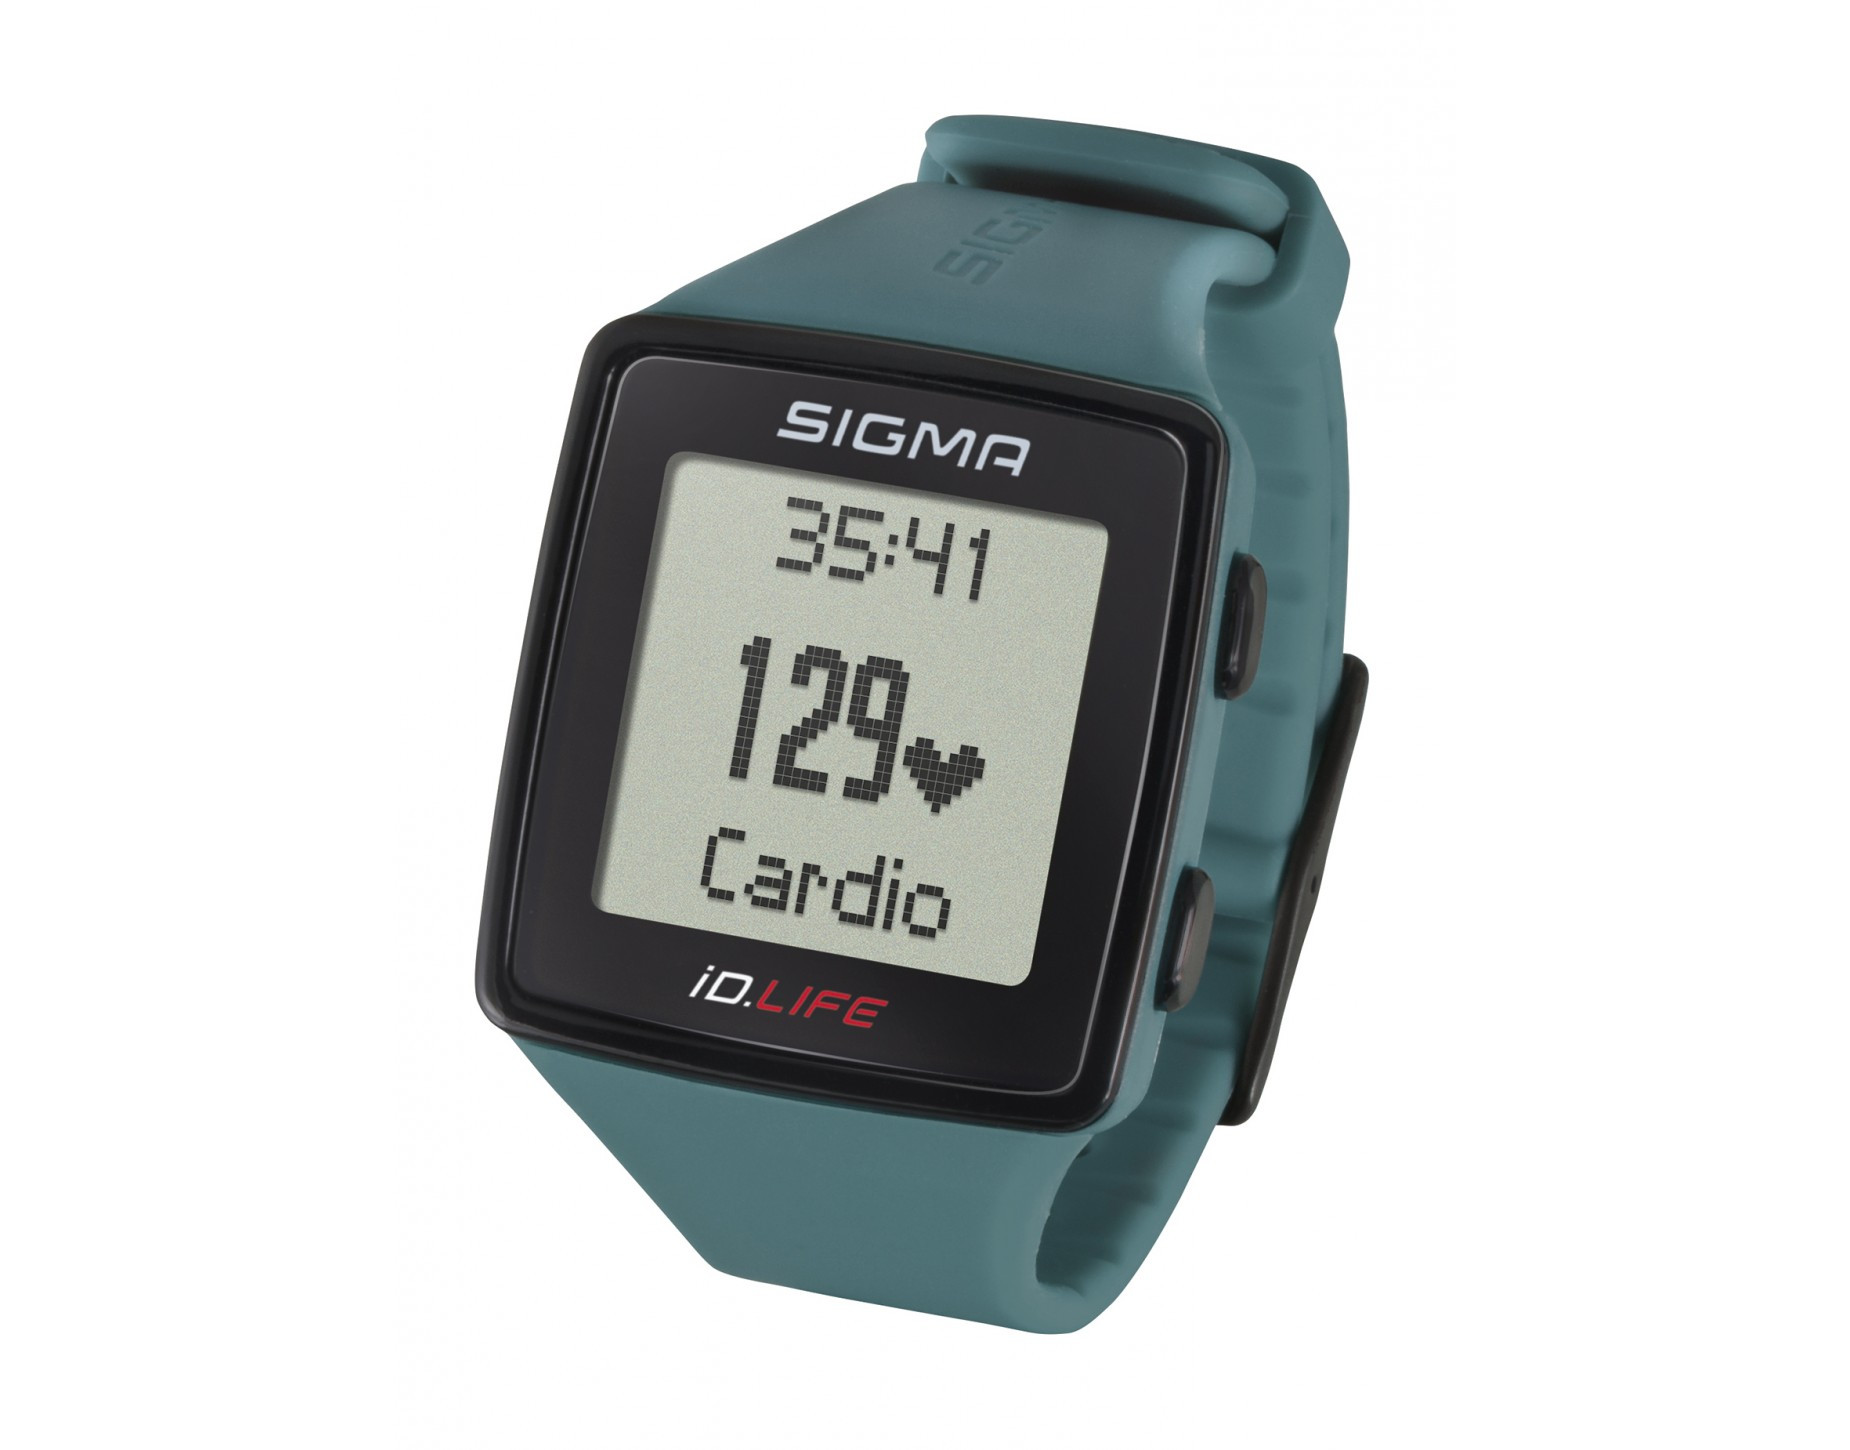 Imagen ID.LIFE Heart Rate Monitor SIGMA 2